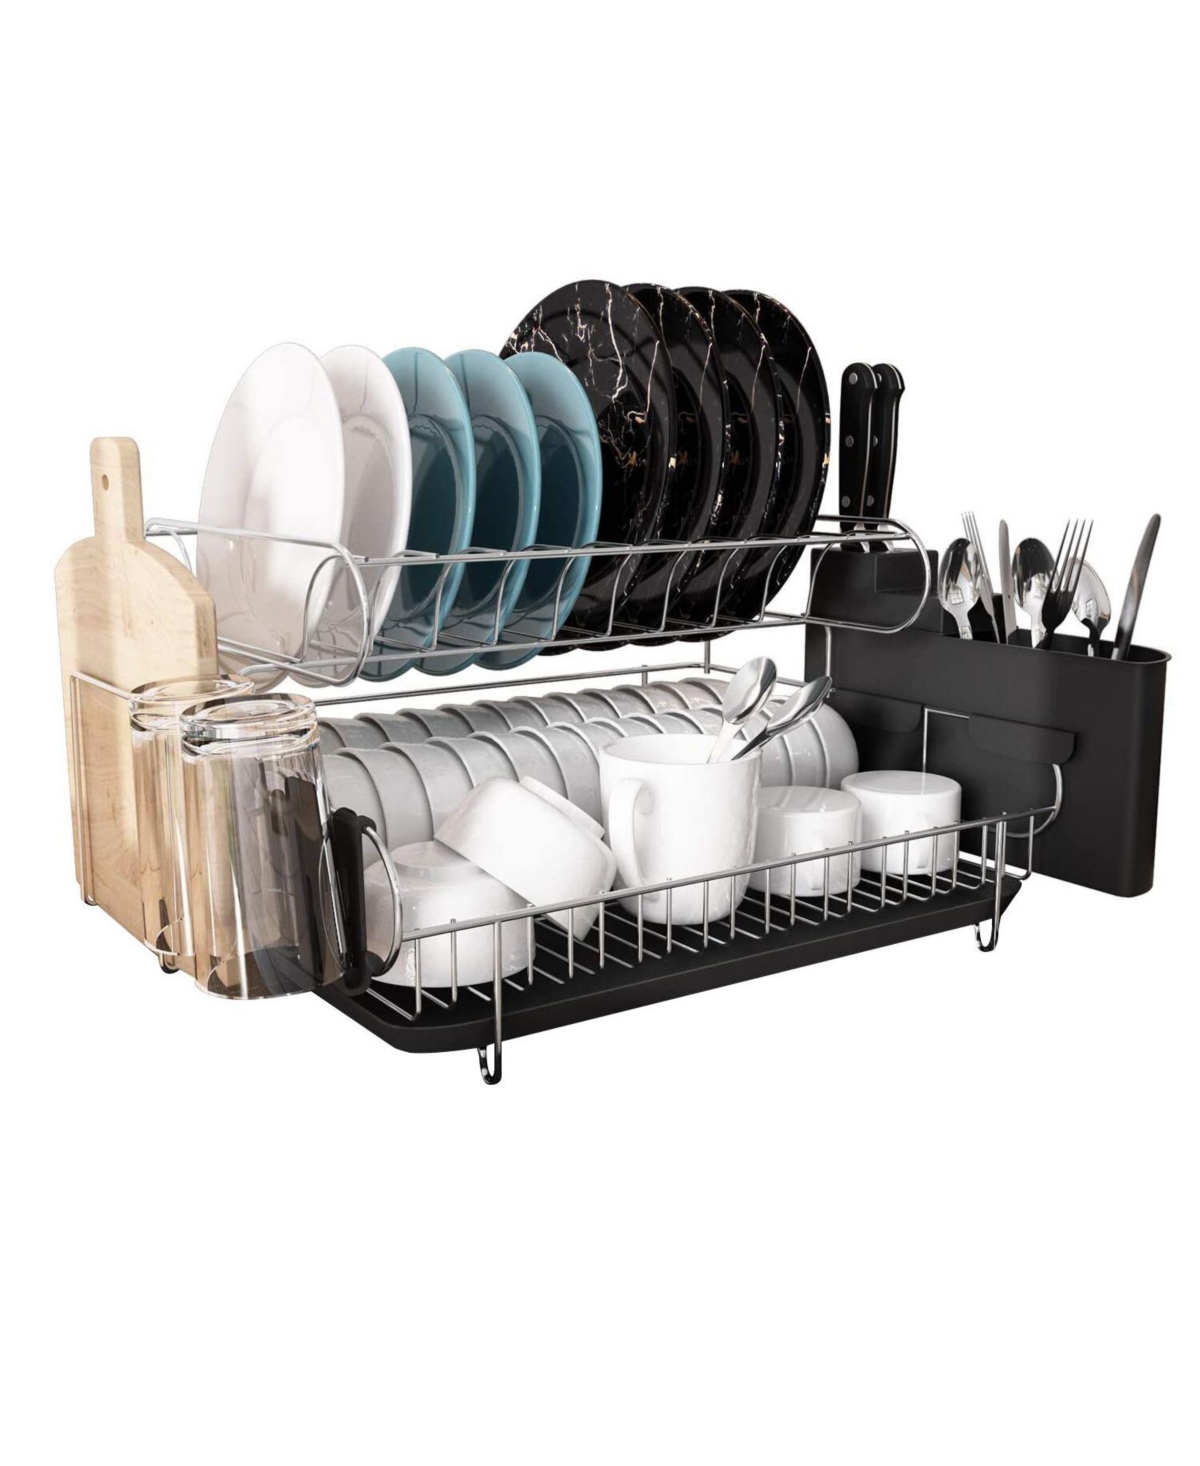 Double Tier Stainless Steel Dish Rack With Drainboard Set And Utensil Holder - Black